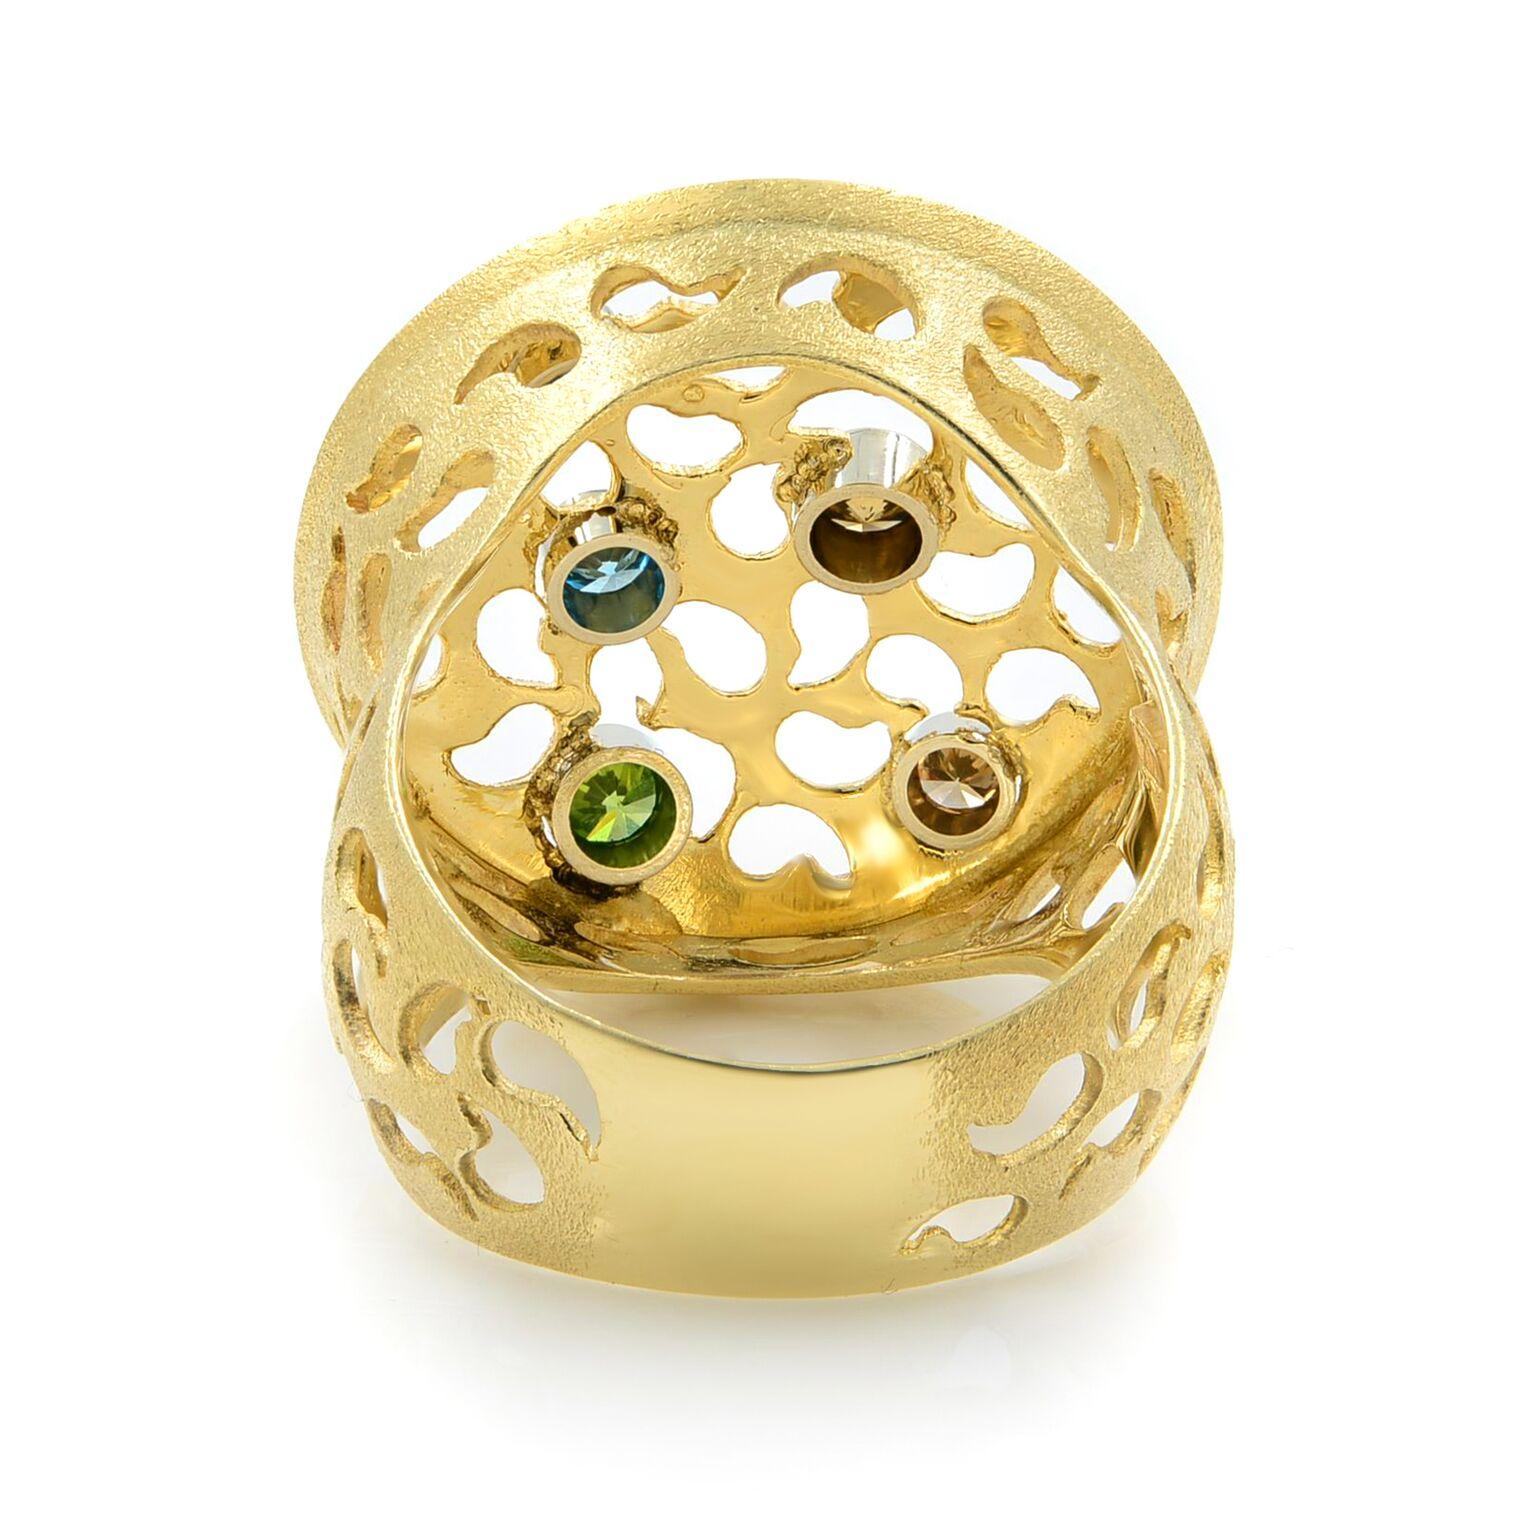 Rachel Koen 5 Colored Diamond Cocktail Ring 14K Yellow Gold 0.50Cttw In New Condition For Sale In New York, NY